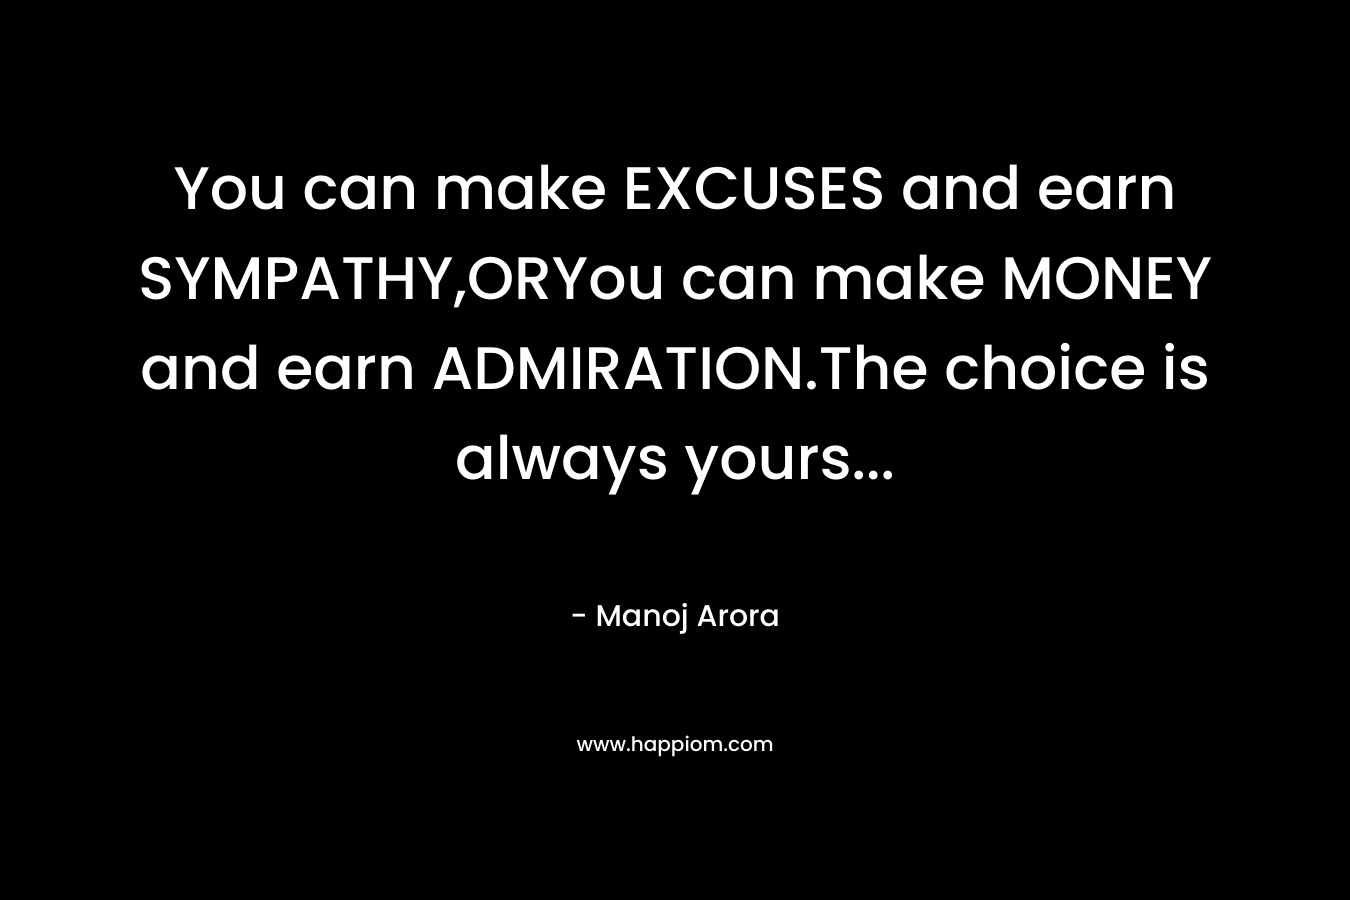 You can make EXCUSES and earn SYMPATHY,ORYou can make MONEY and earn ADMIRATION.The choice is always yours...